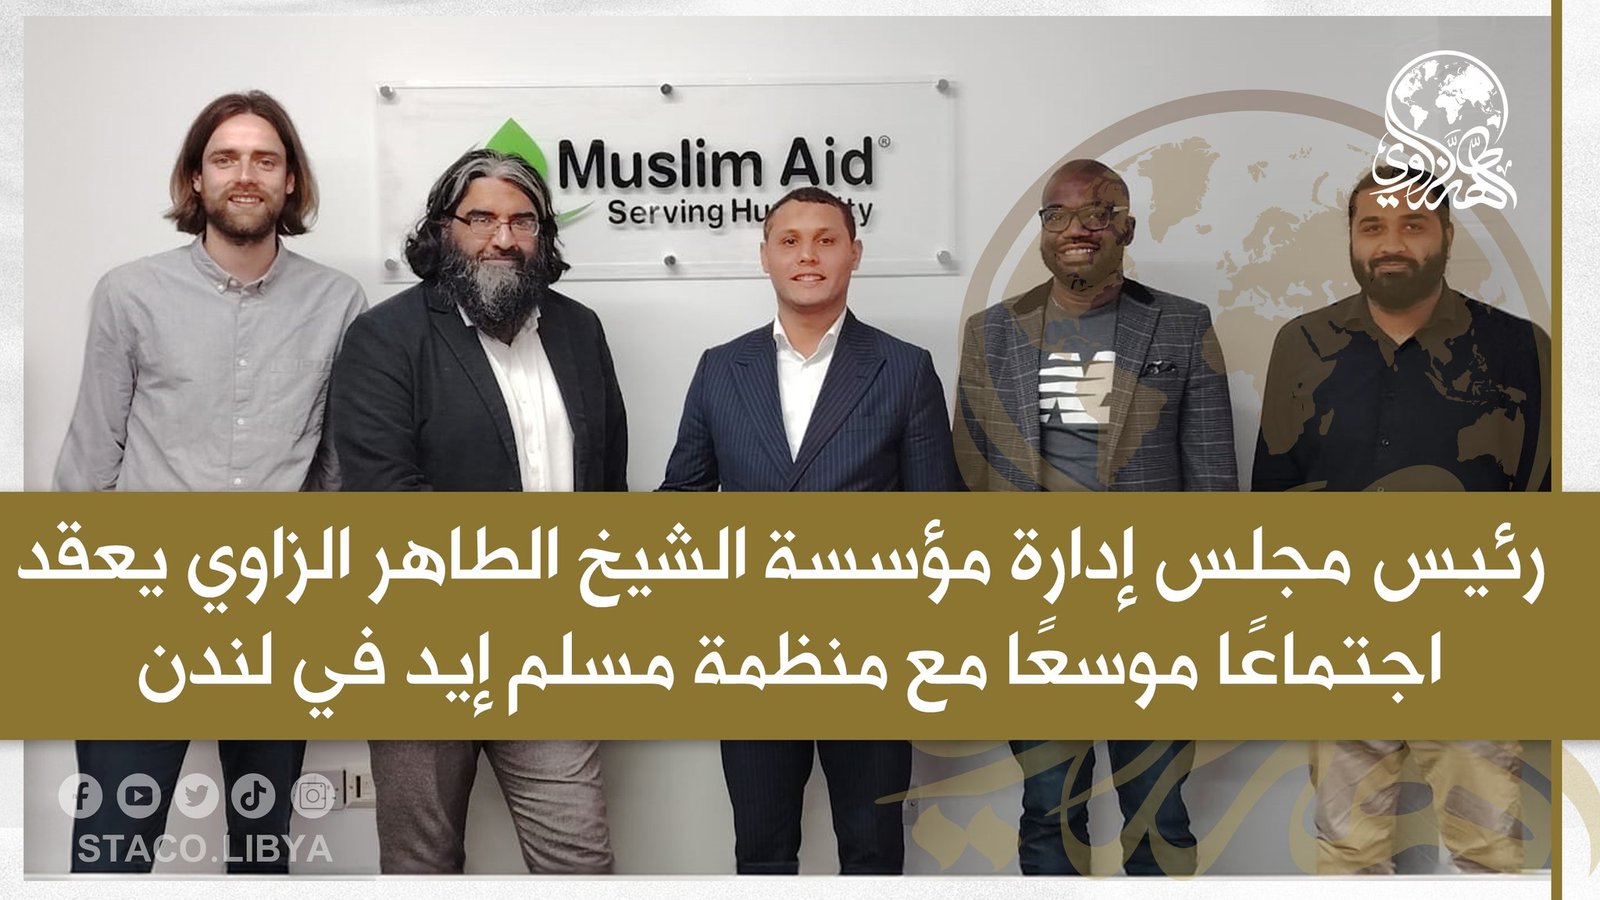 Chairman of the Board of Directors the Sheikh Tahir Al-Zzawi organization visits the Humanitarian Academy for Development in Birmingham